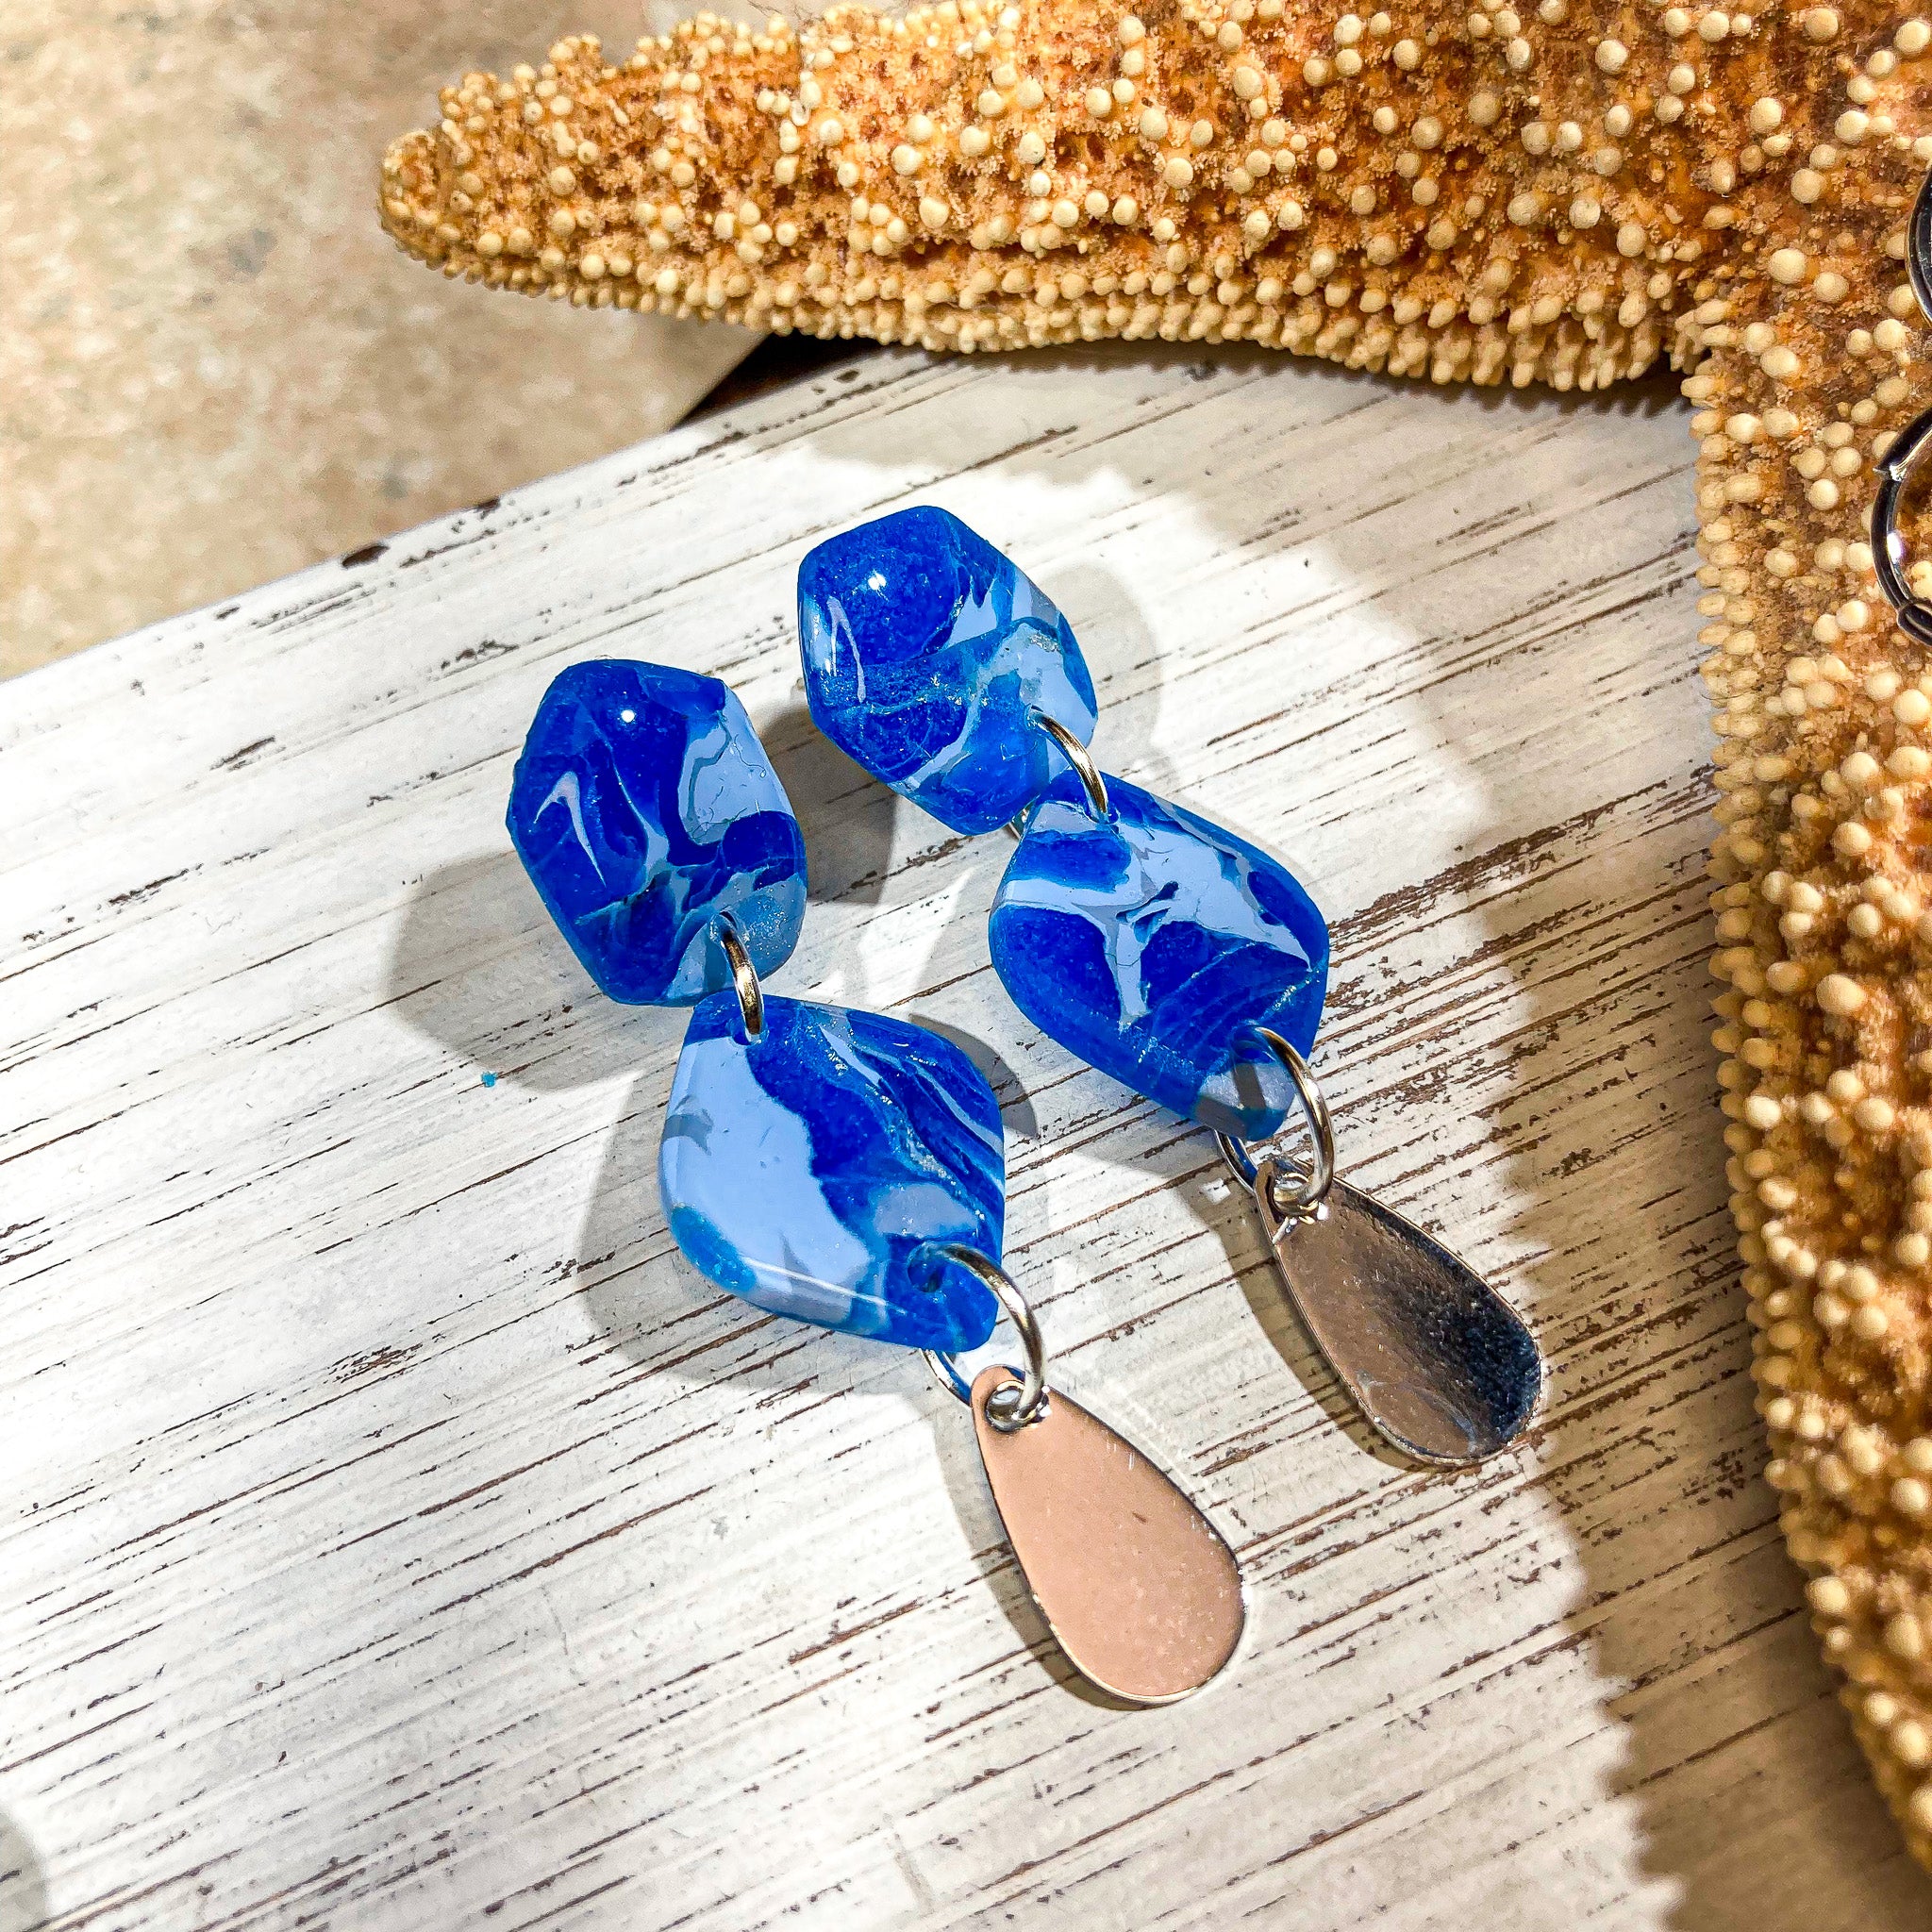 Handcrafted polymer clay earrings in marbled cornflower and sapphire blue with a silver teardrop charm, displayed on a white wooden surface with a starfish decor in the background.